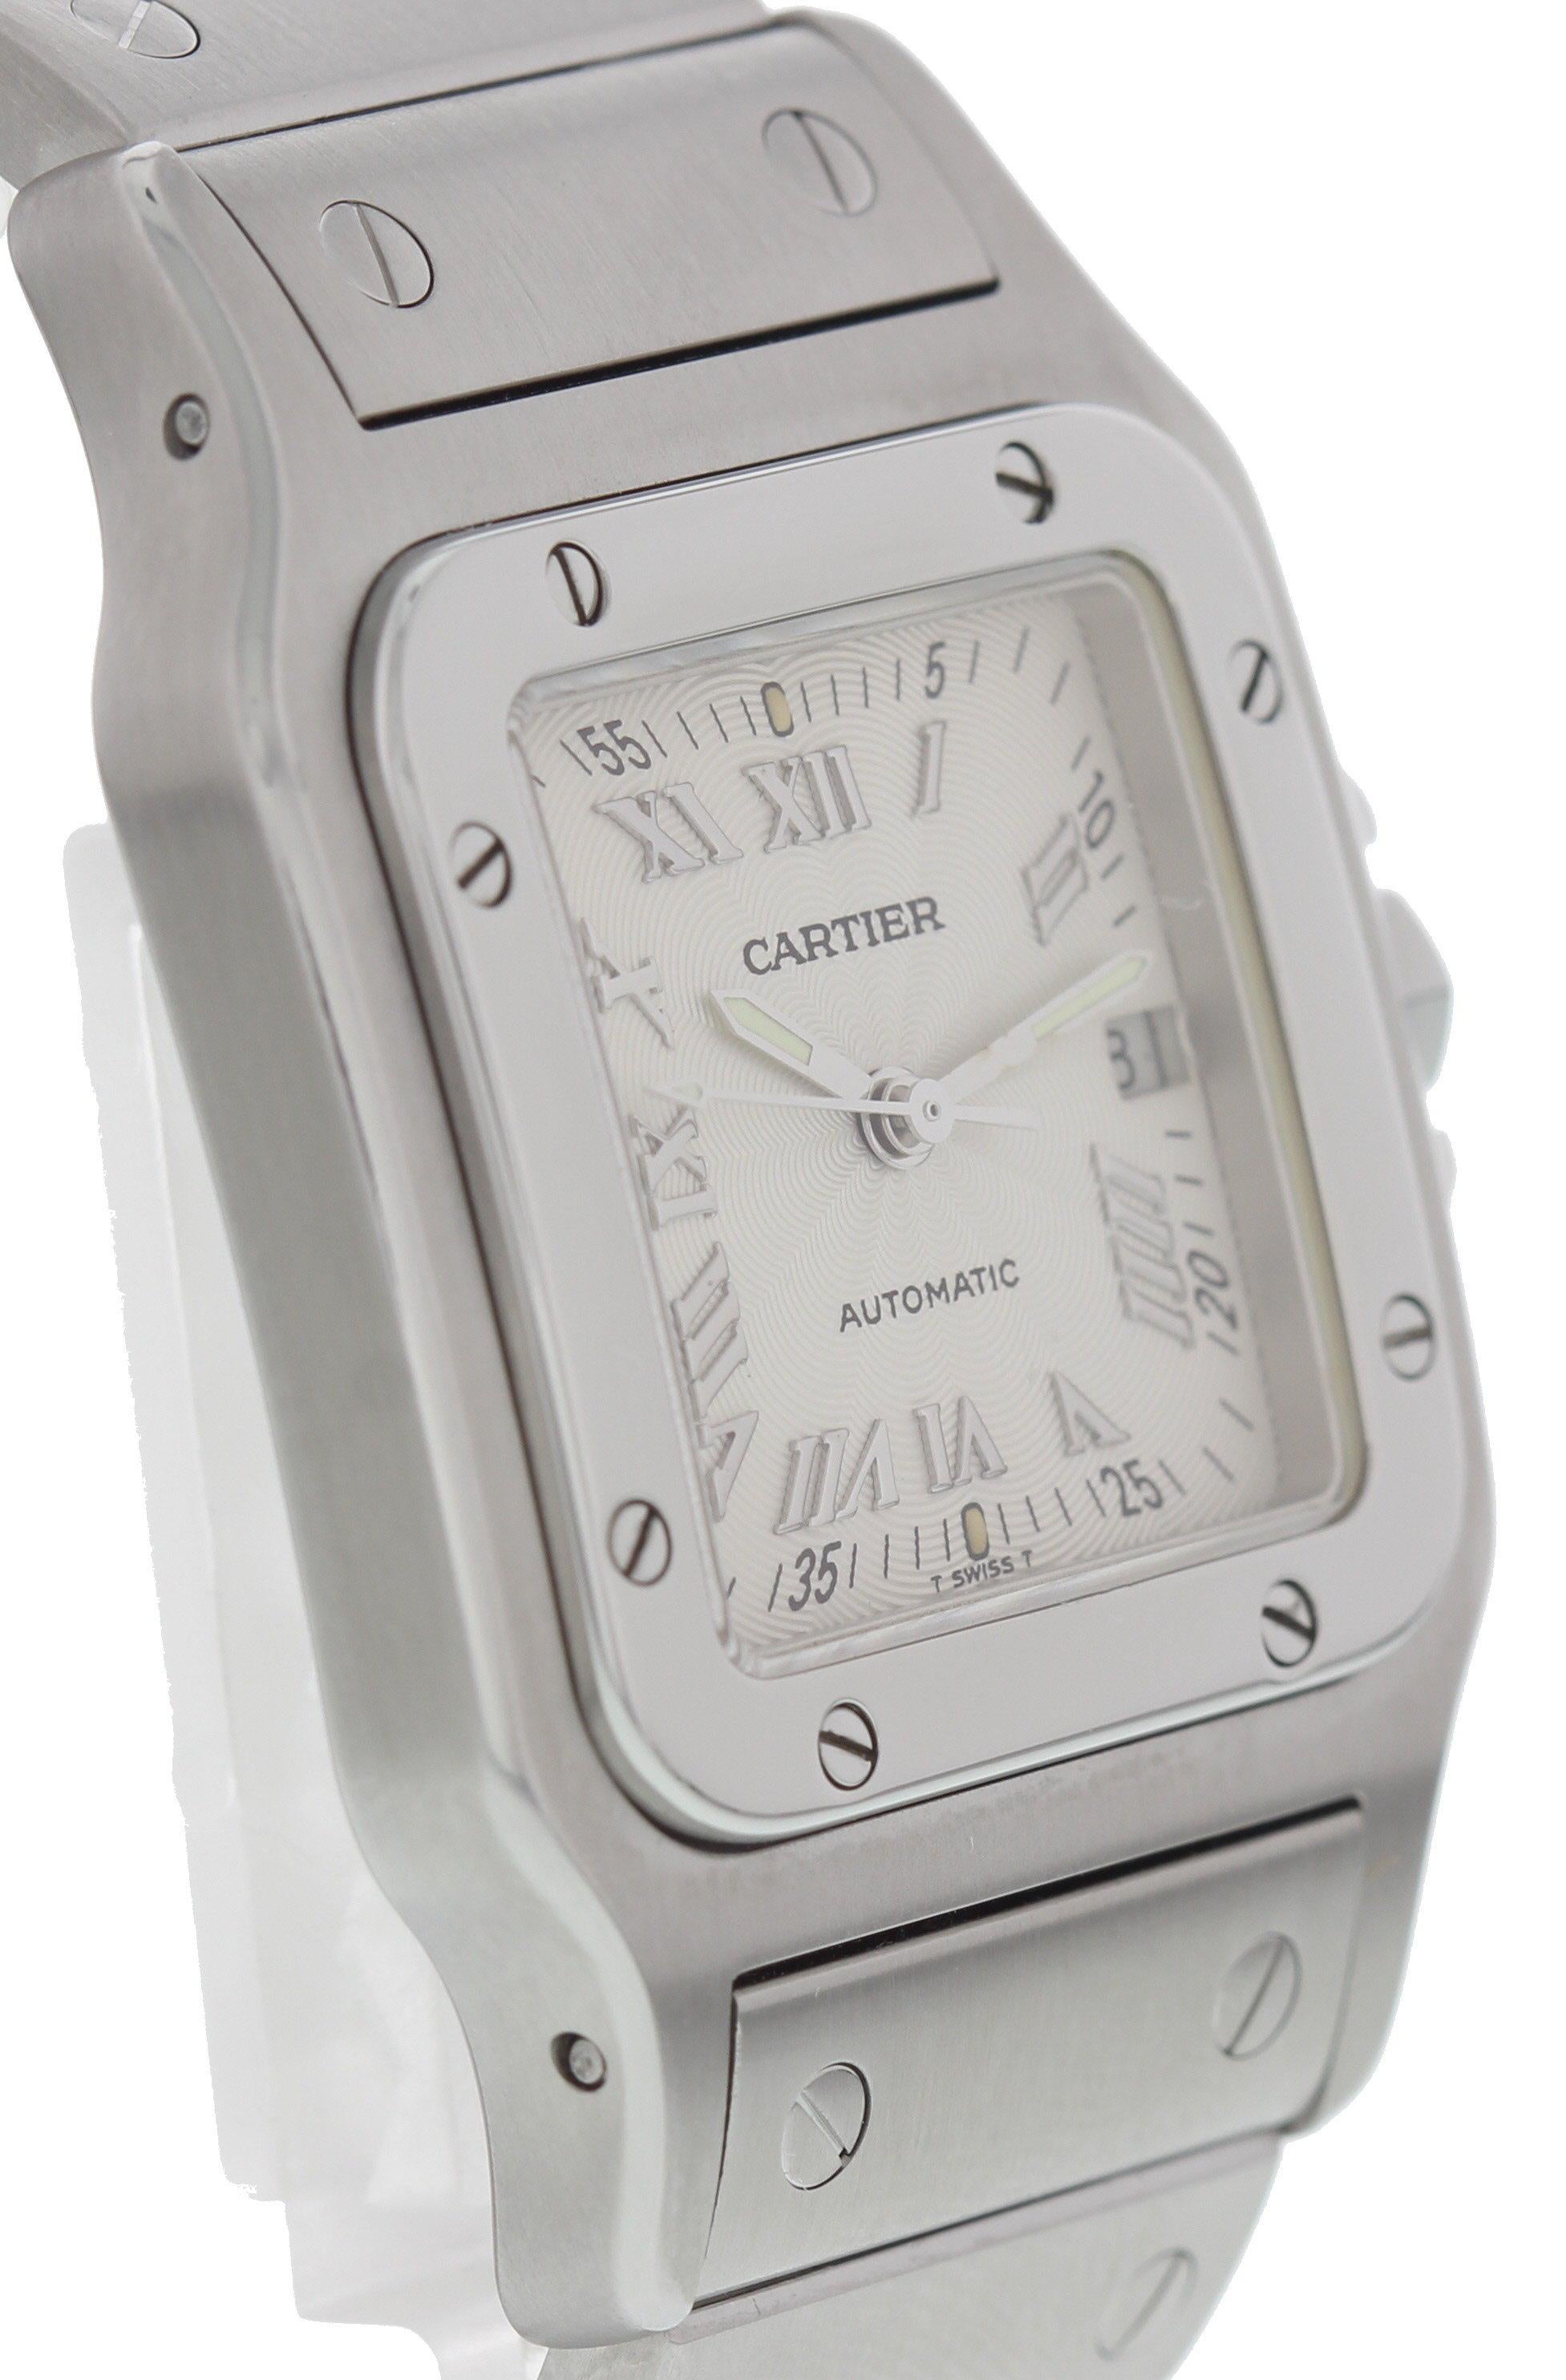 Cartier Santos Galbee 2319. Stainless steel 31 mm case. Stainless steel bezel. White guilloche dial with steel Roman numeral markers along with a date display. The crown has a blue cabochon. Stainless steel band, can fit up to a 6.5 inch wrist.